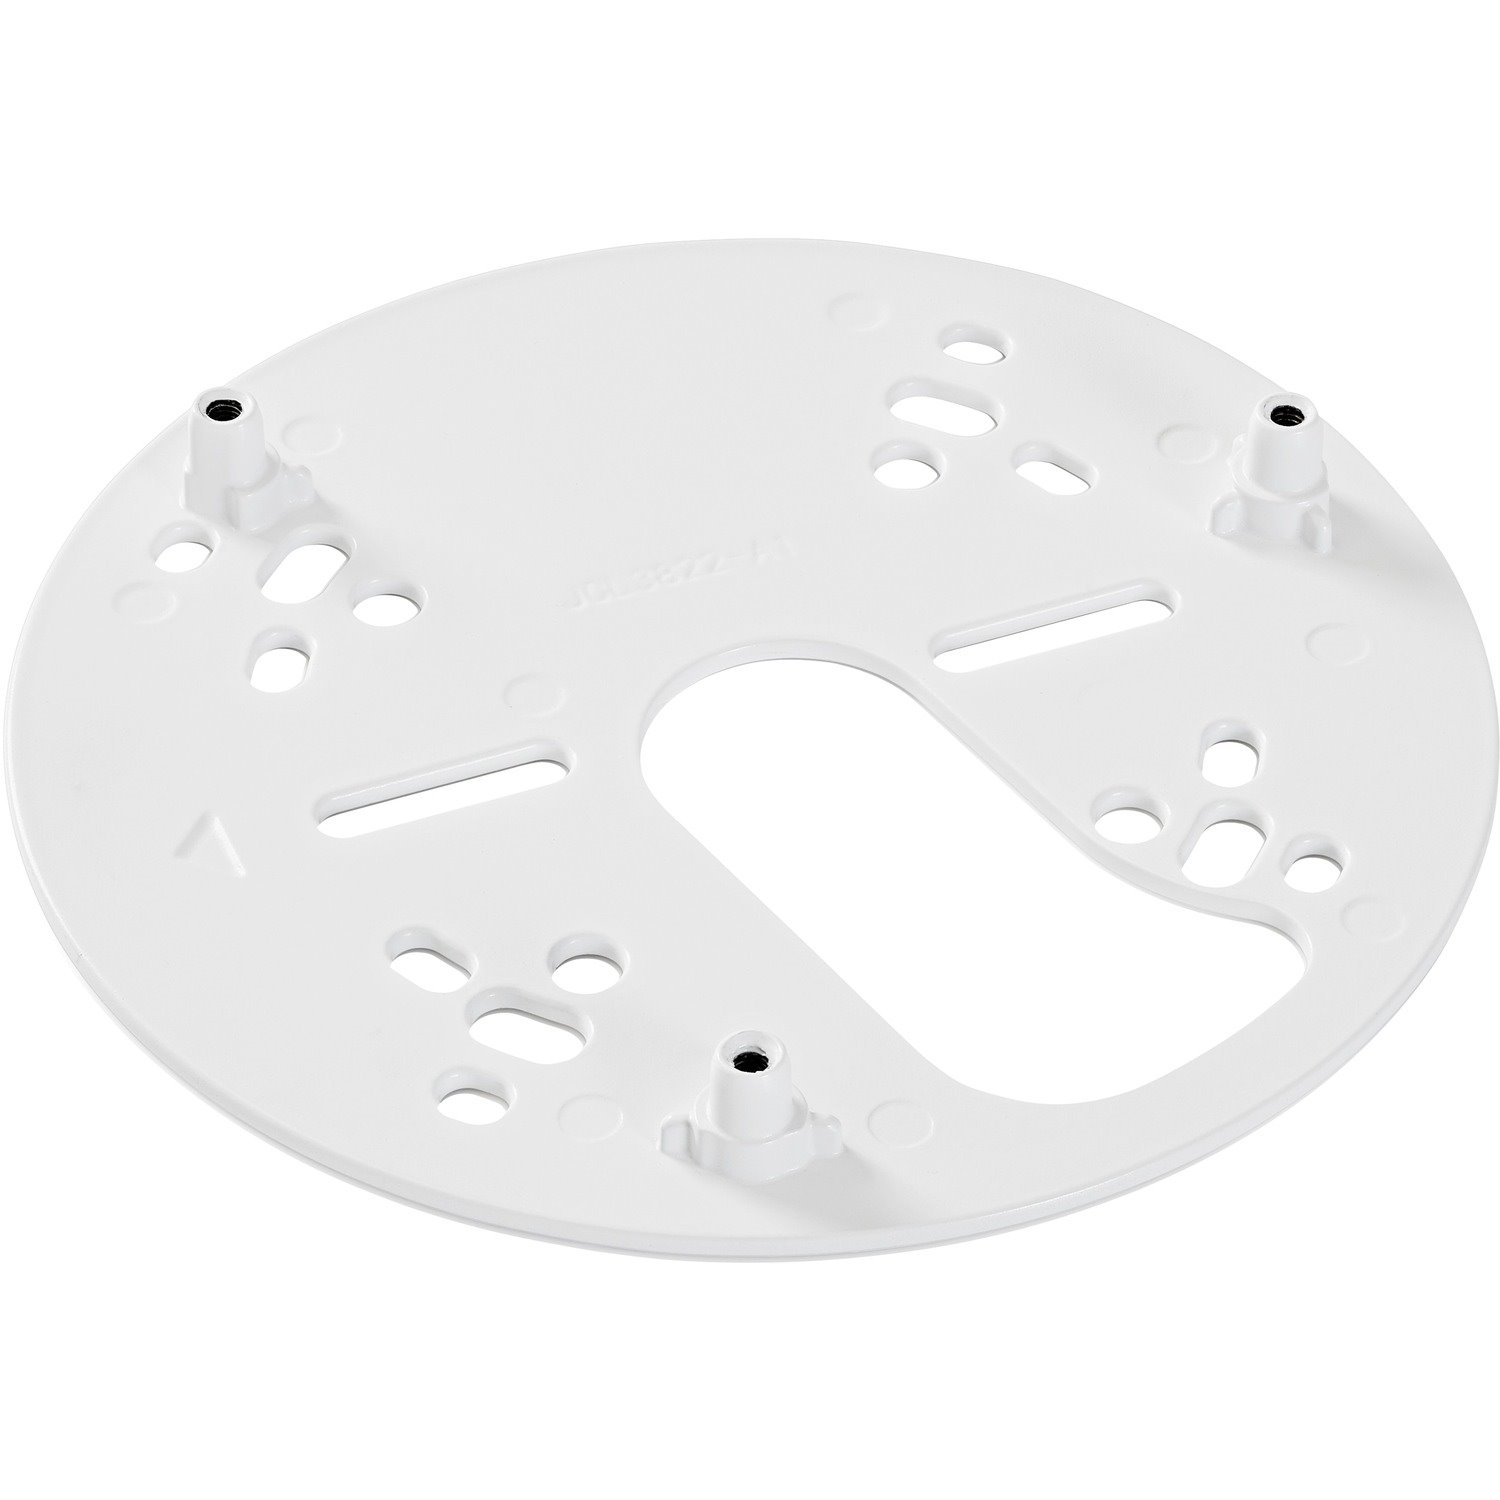 Bosch Mounting Plate for Network Camera